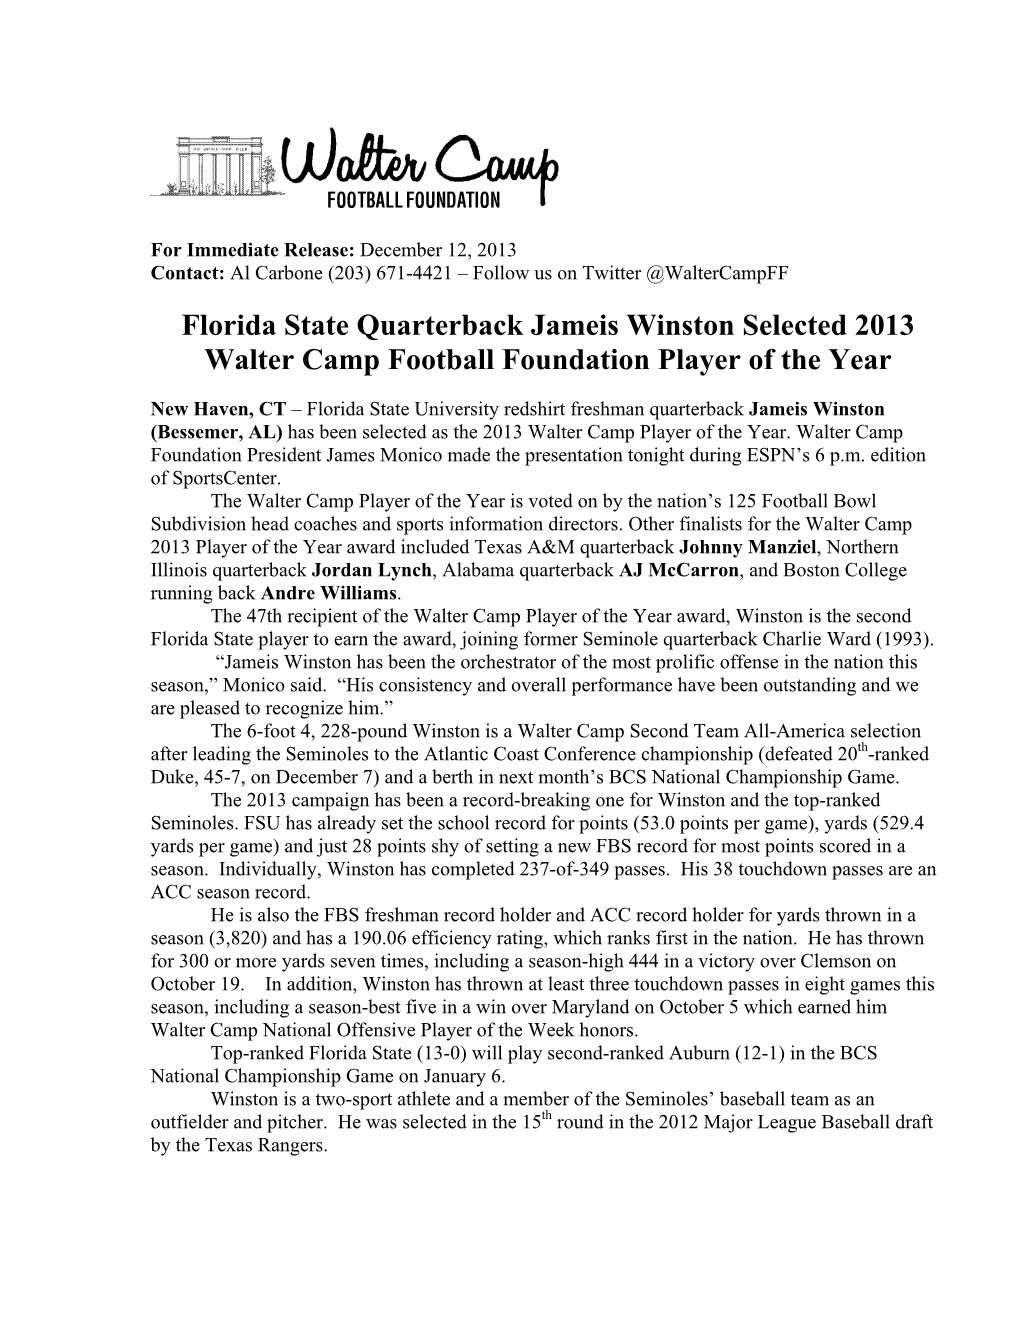 Florida State Quarterback Jameis Winston Selected 2013 Walter Camp Football Foundation Player of the Year